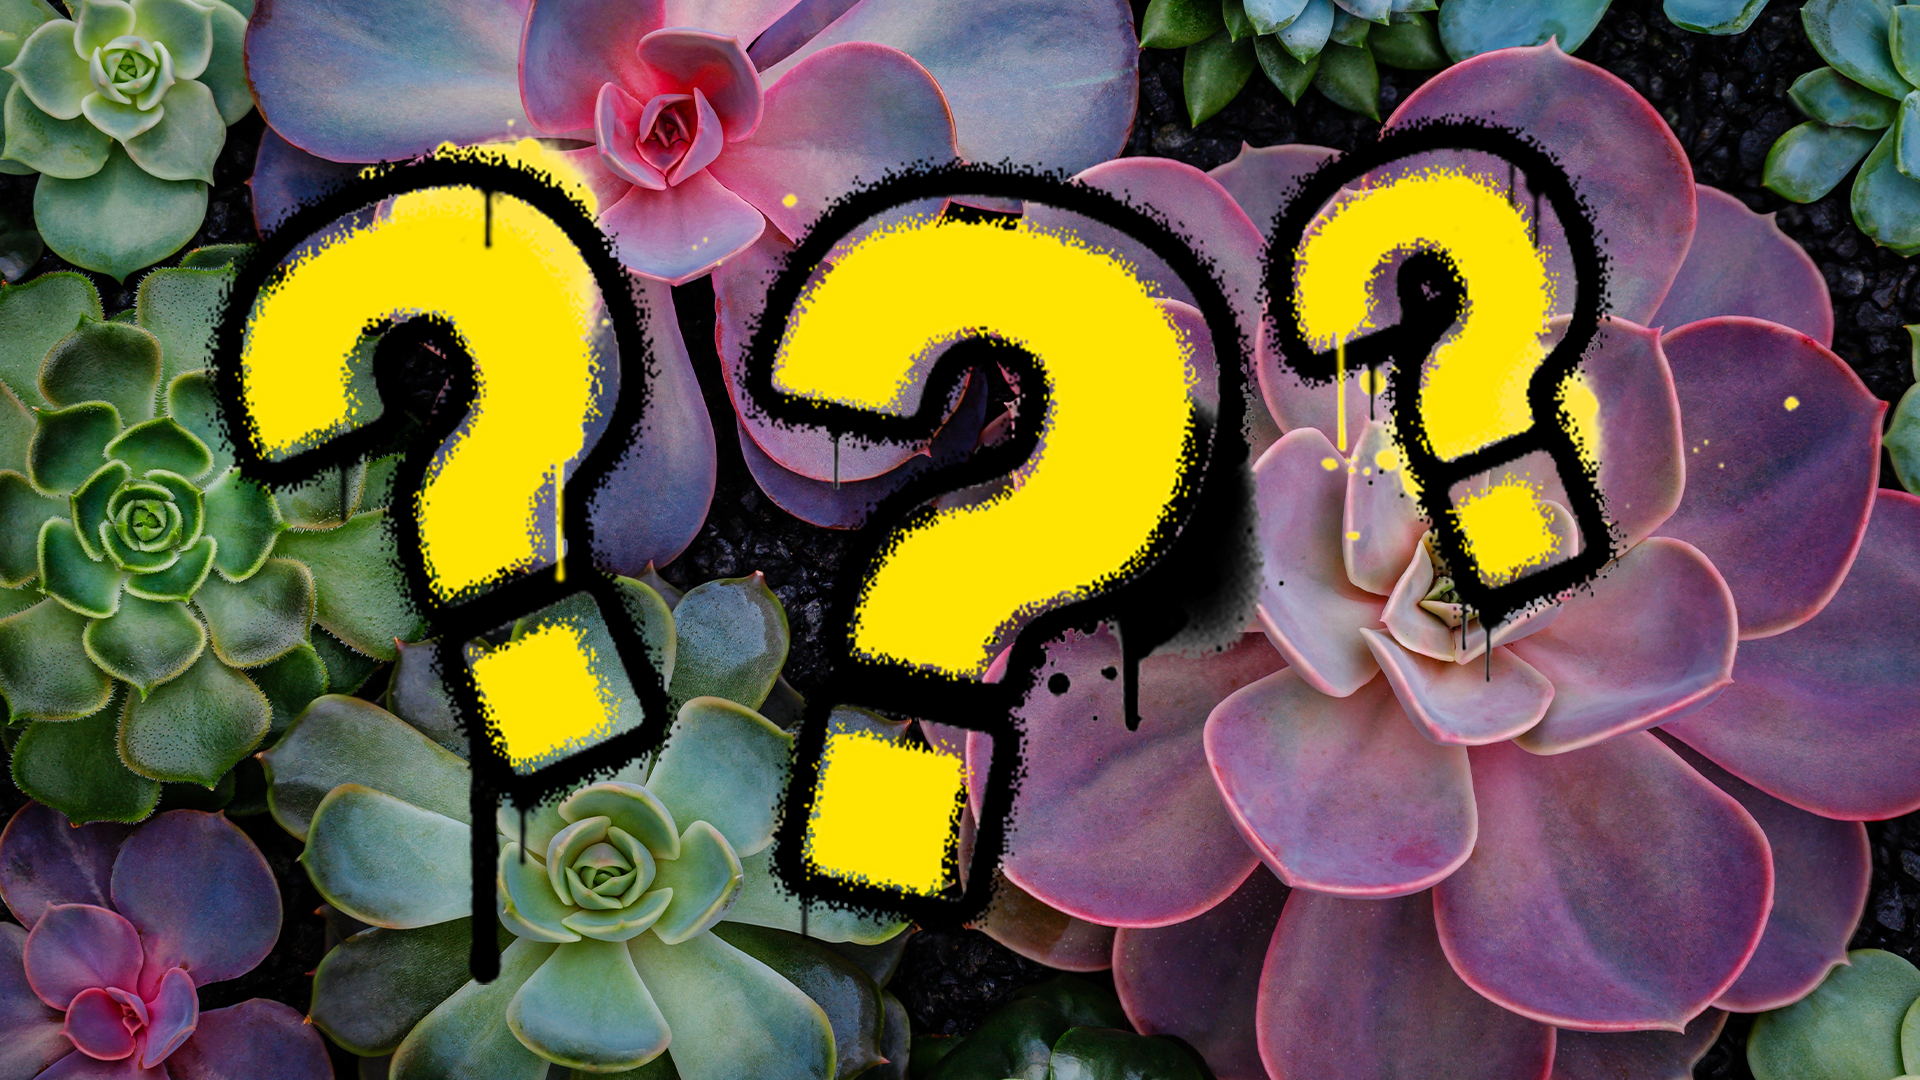 Succulents and question marks